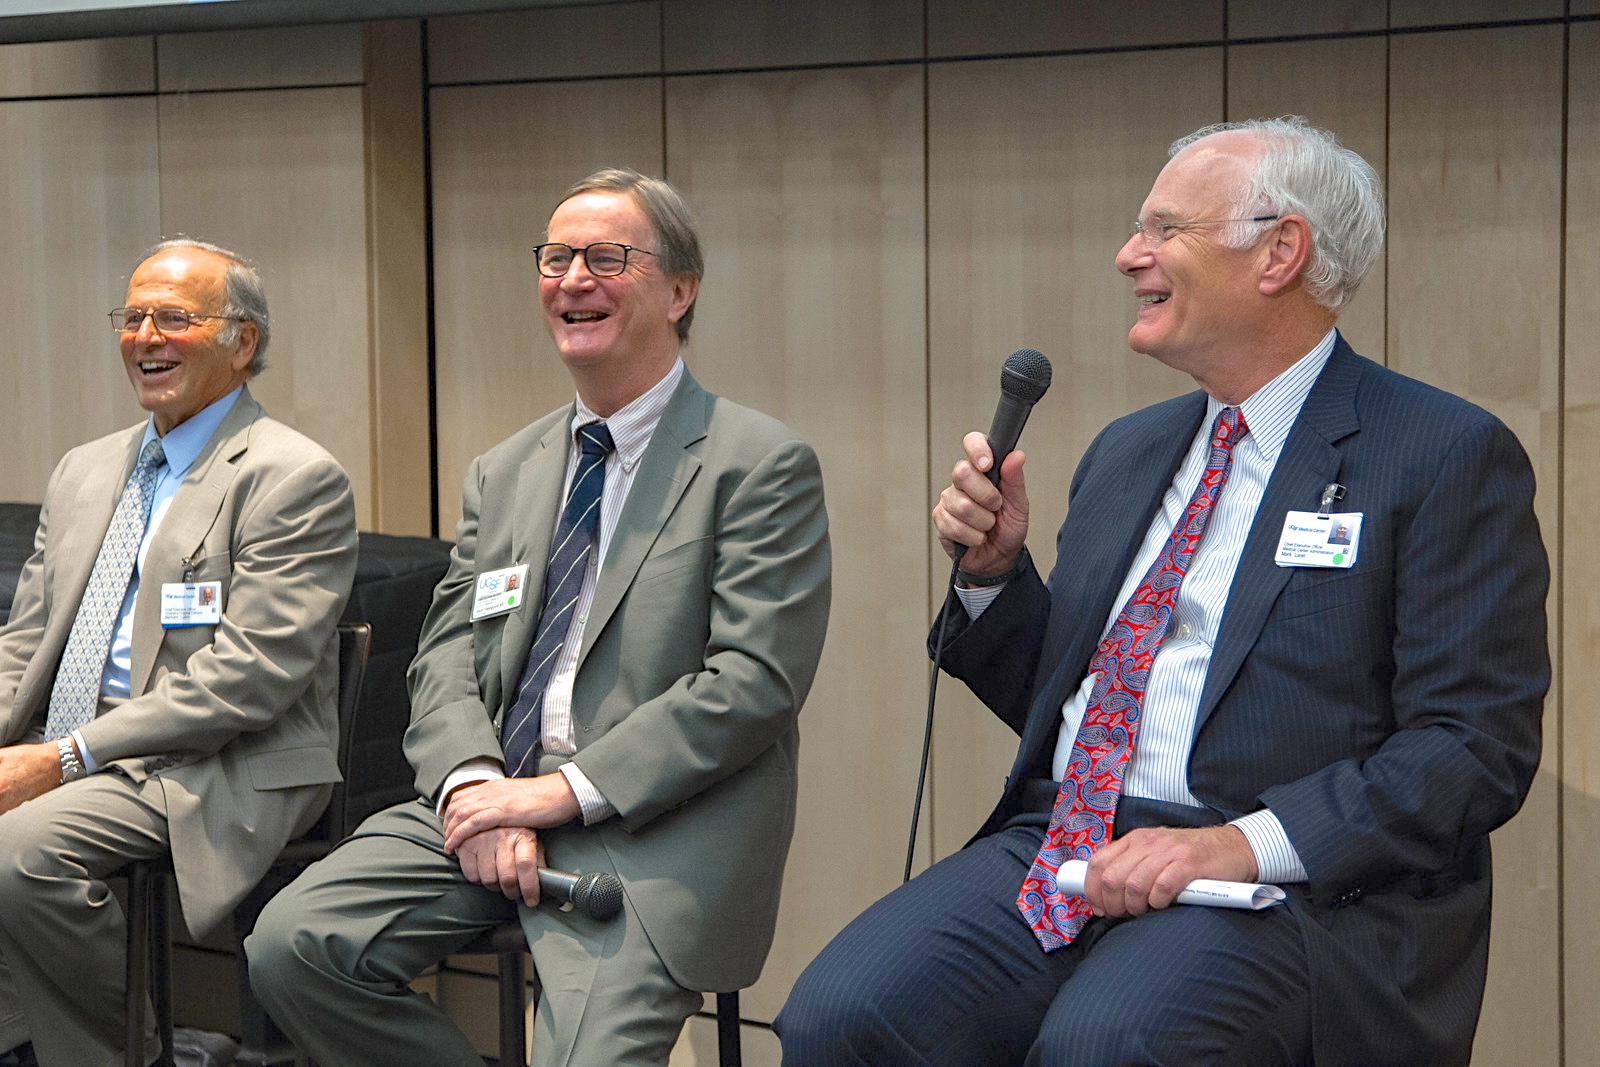 From left: Bert Lubin, MD, CEO of UCSF Benioff Children's Hospital Oakland; Sam Hawgood, MBBS, interim chancellor of UCSF; and Mark Laret, CEO of UCSF Benioff Children's Hospital San Francisco.